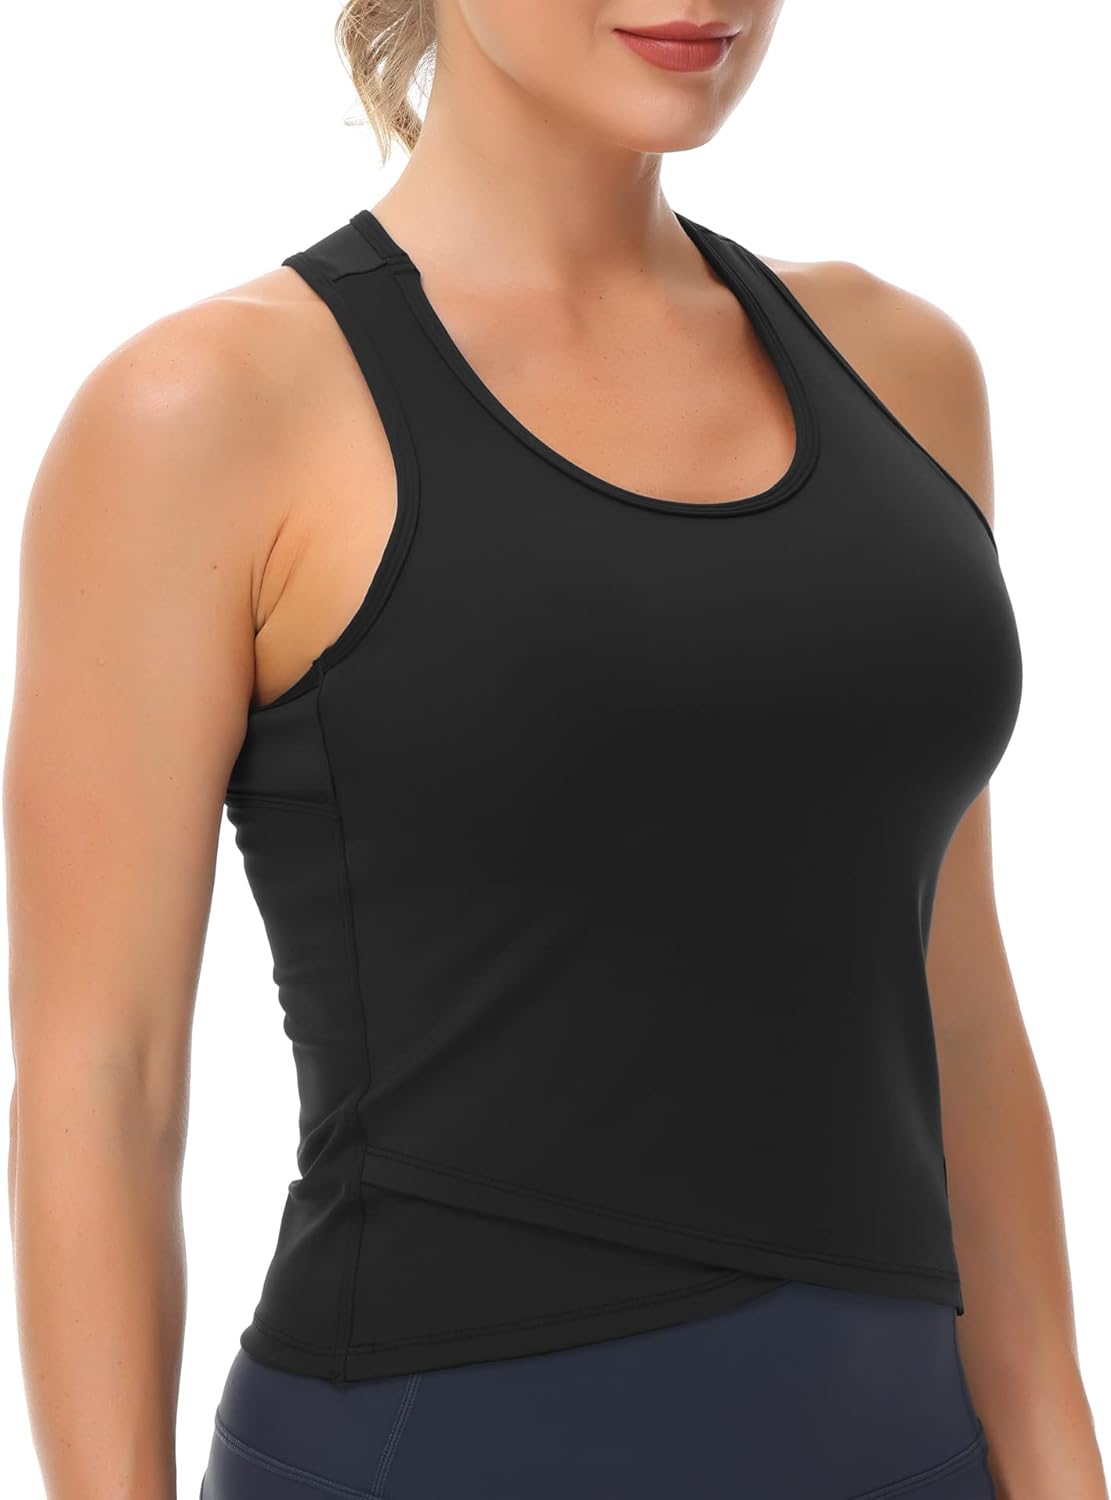 THE GYM PEOPLE Women's Sports Bra Sleeveless Workout Tank Tops - Import It  All